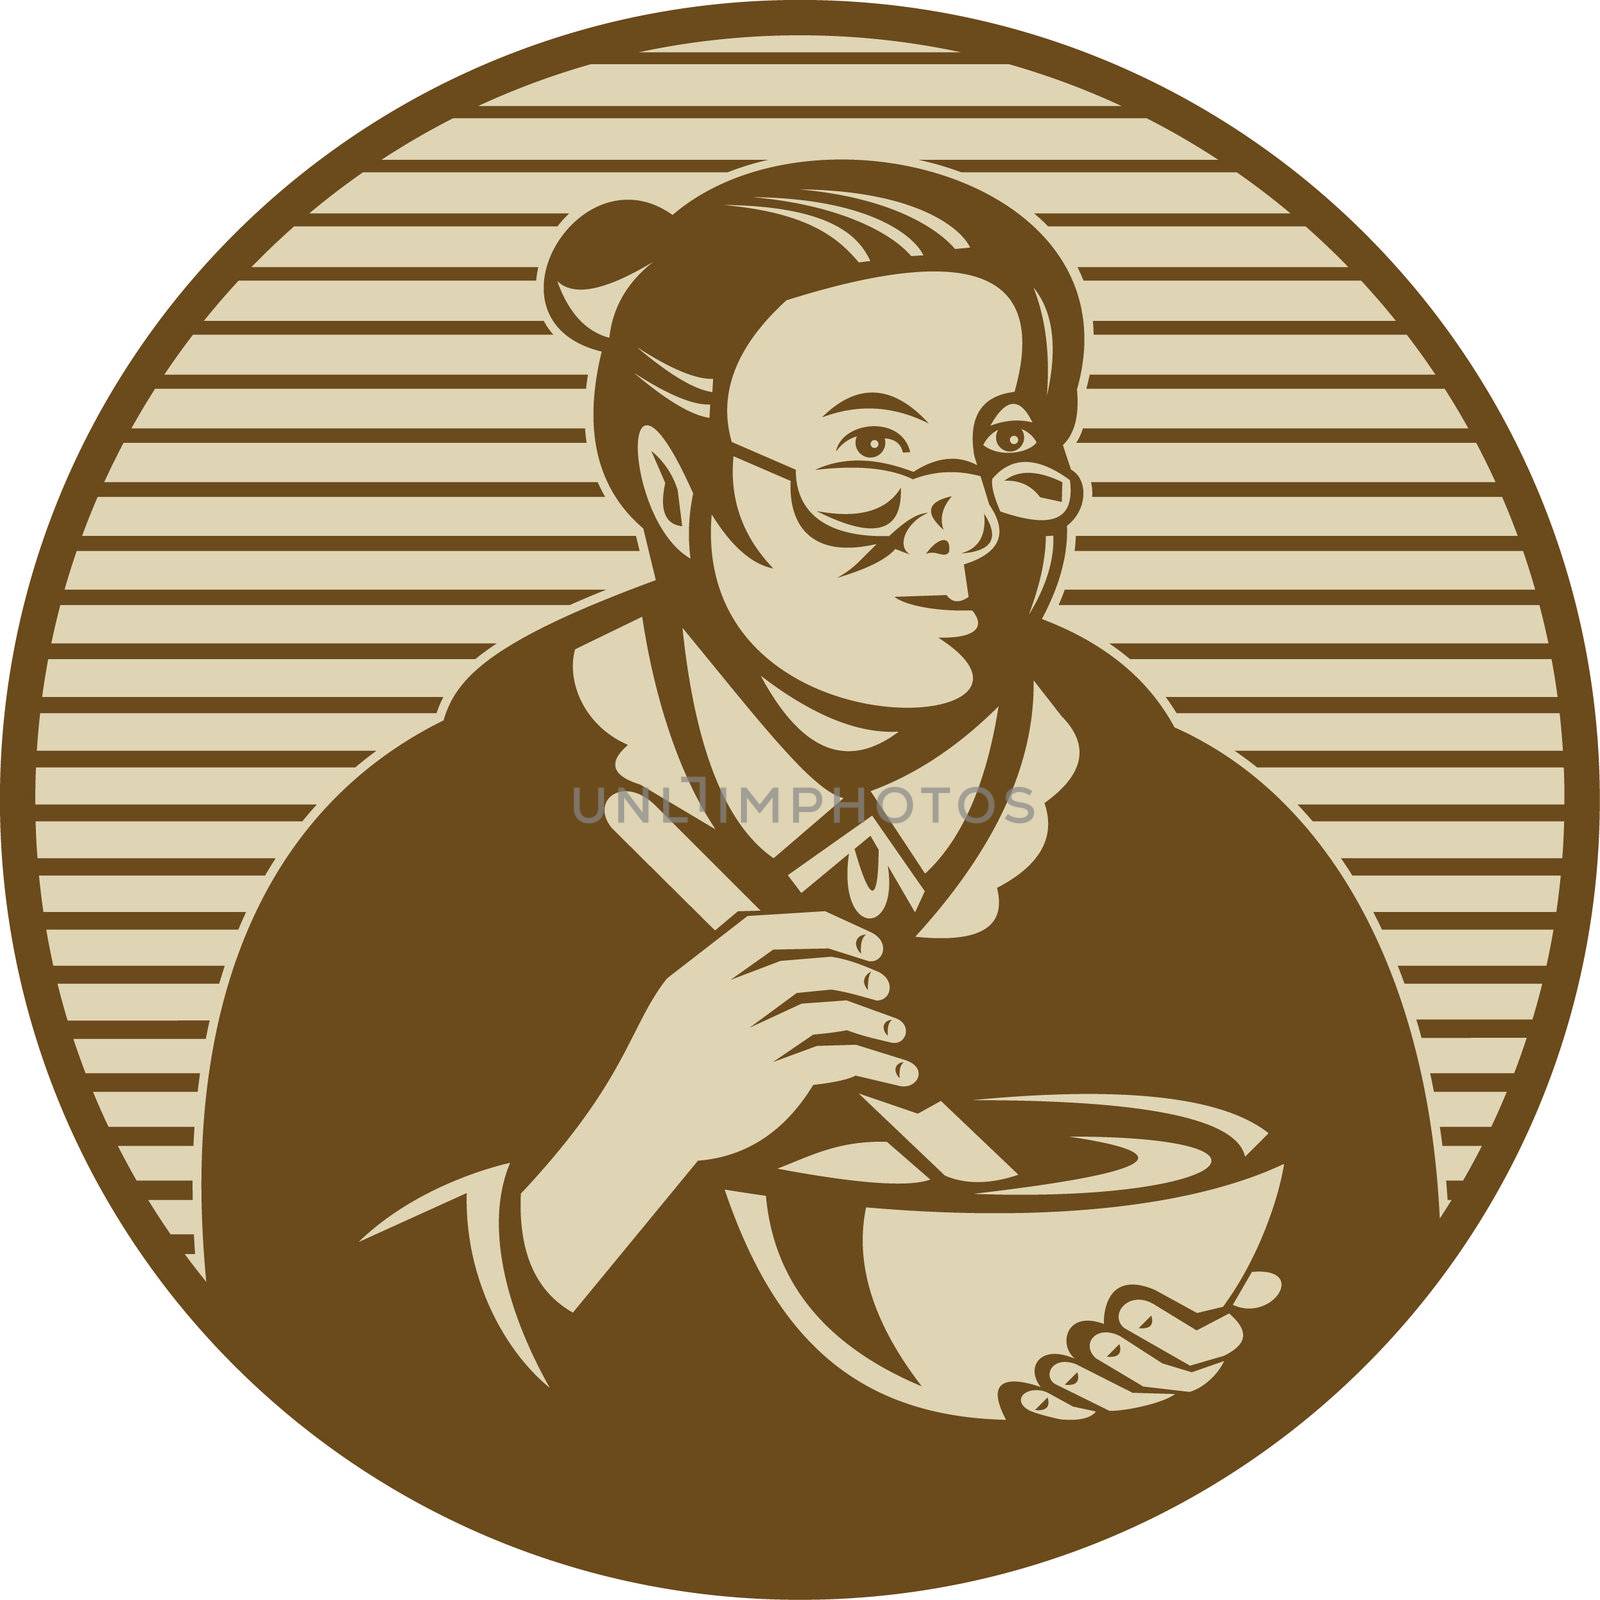 illustration of an old woman or granny cooking ixing bowl